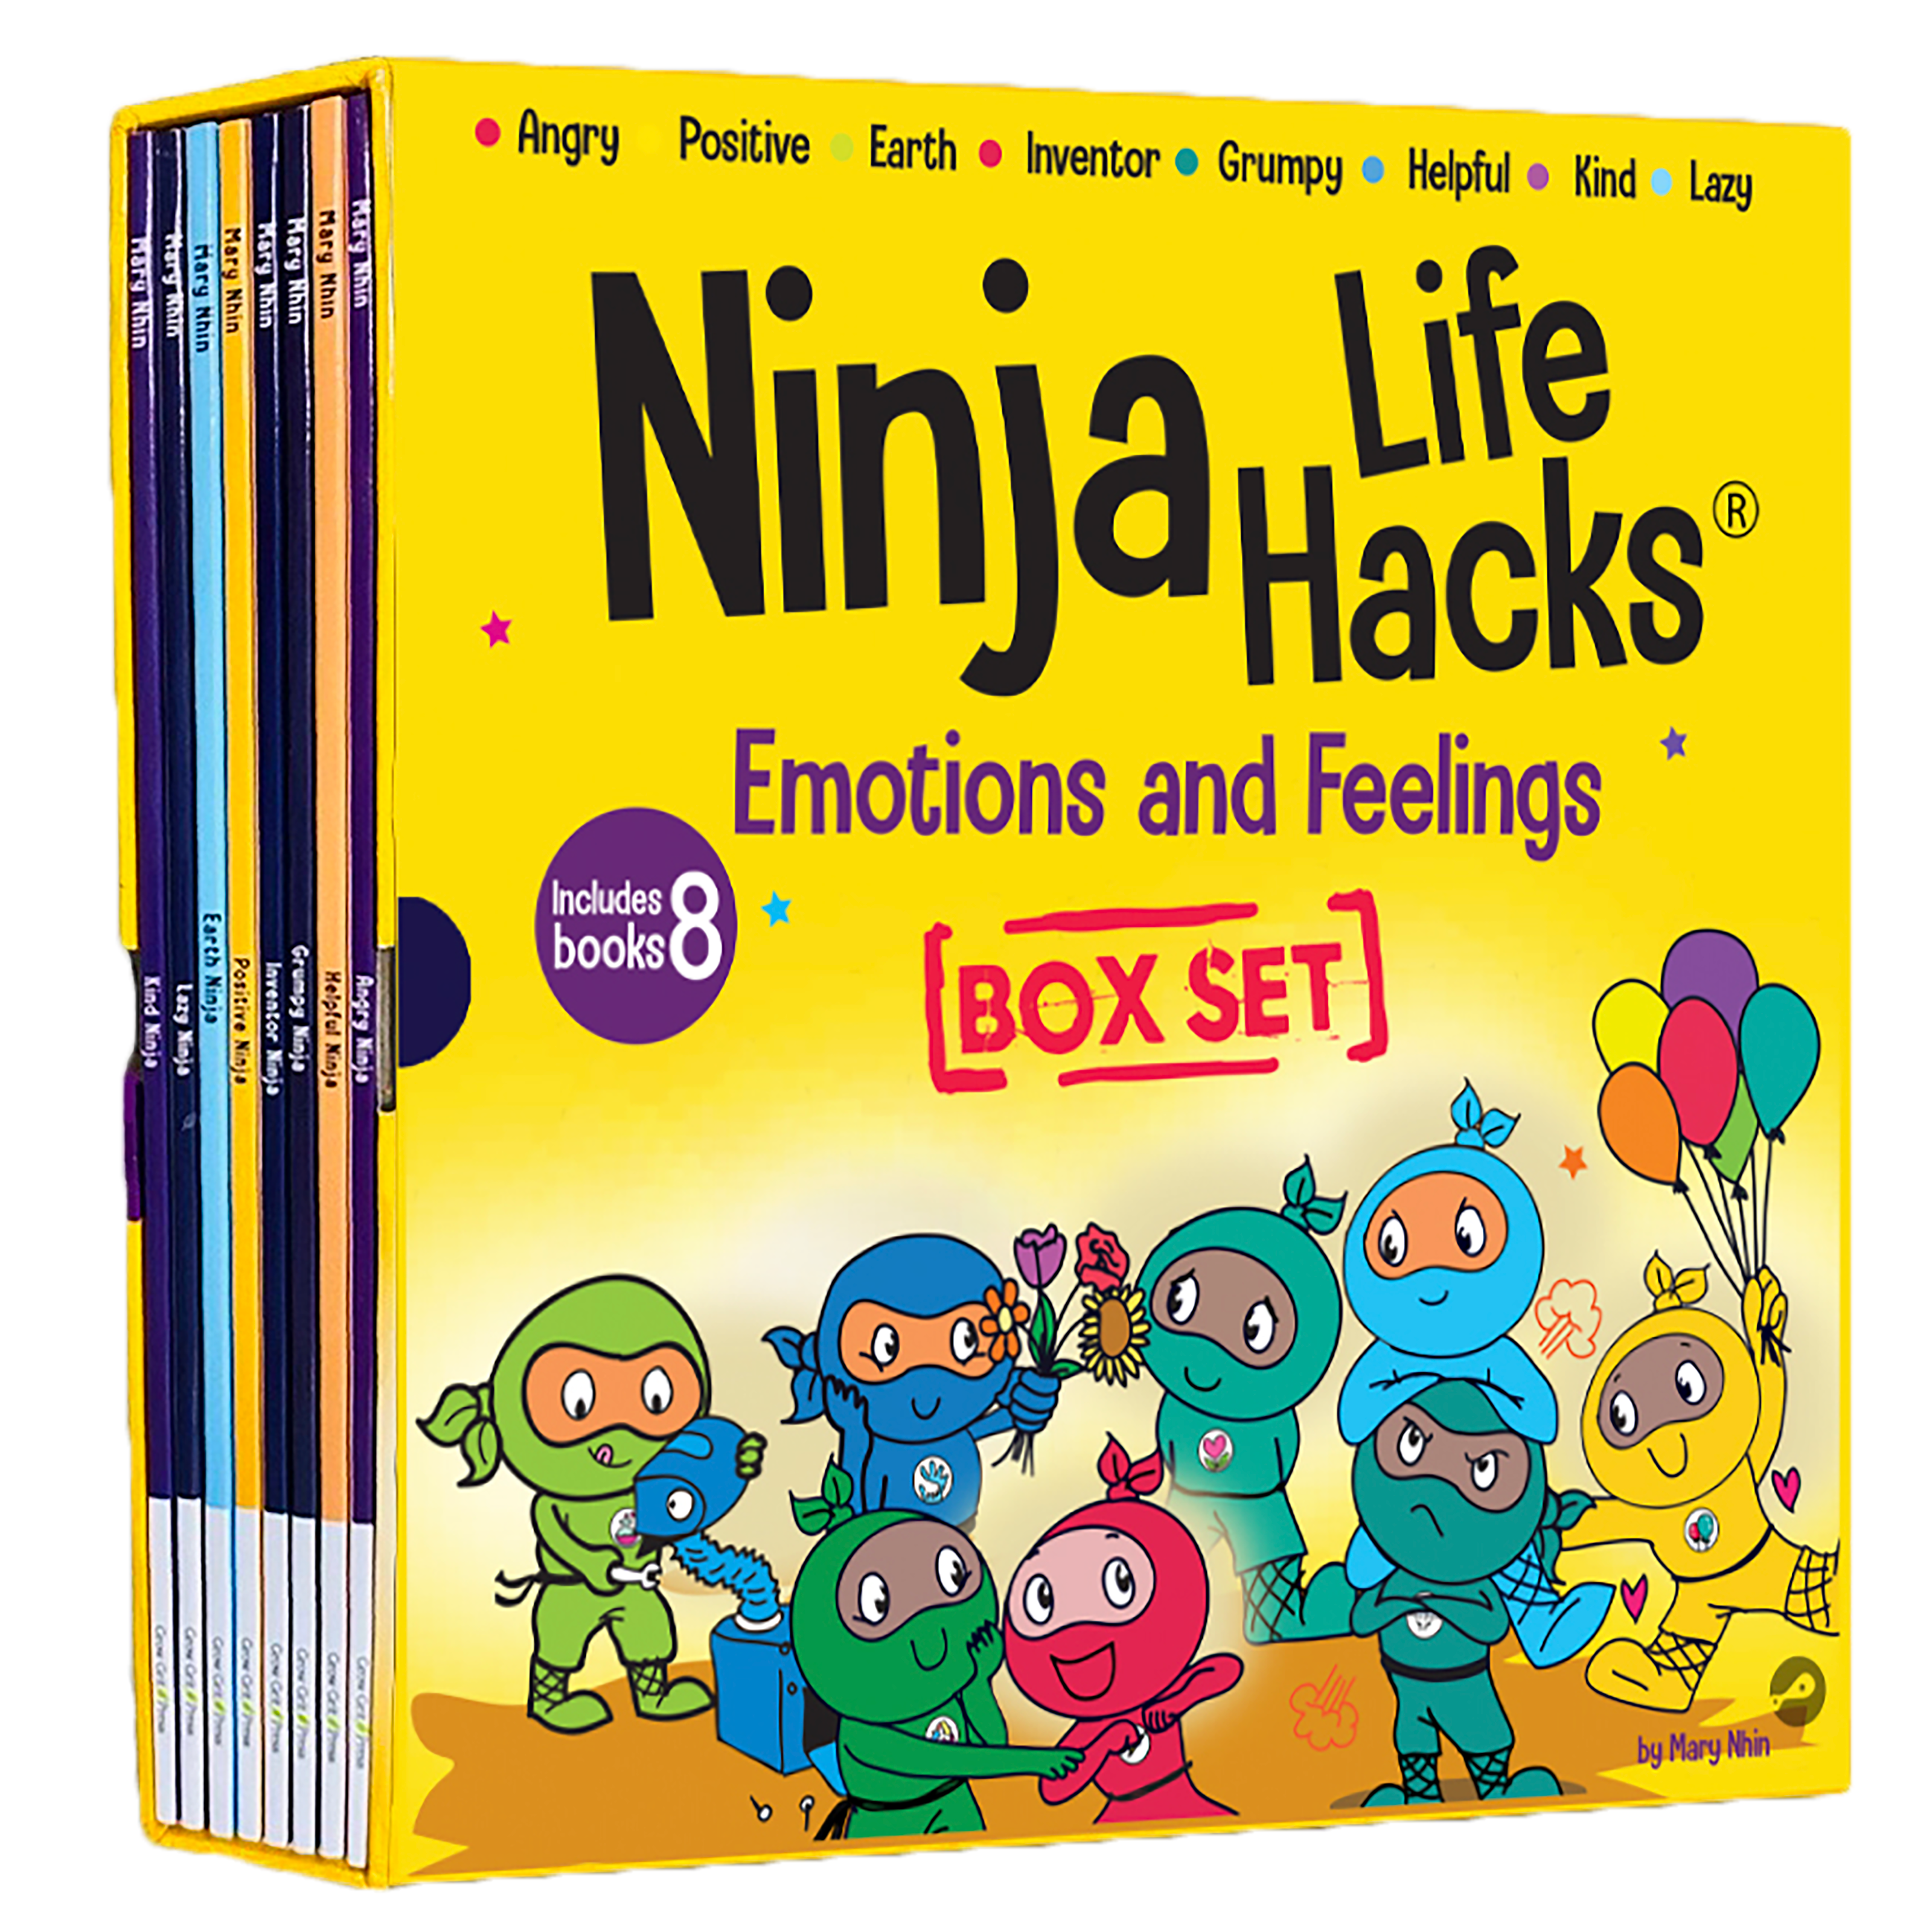 Focused Ninja: A Children's Book About Increasing Focus and Concentration  at Home and School (Ninja Life Hacks)